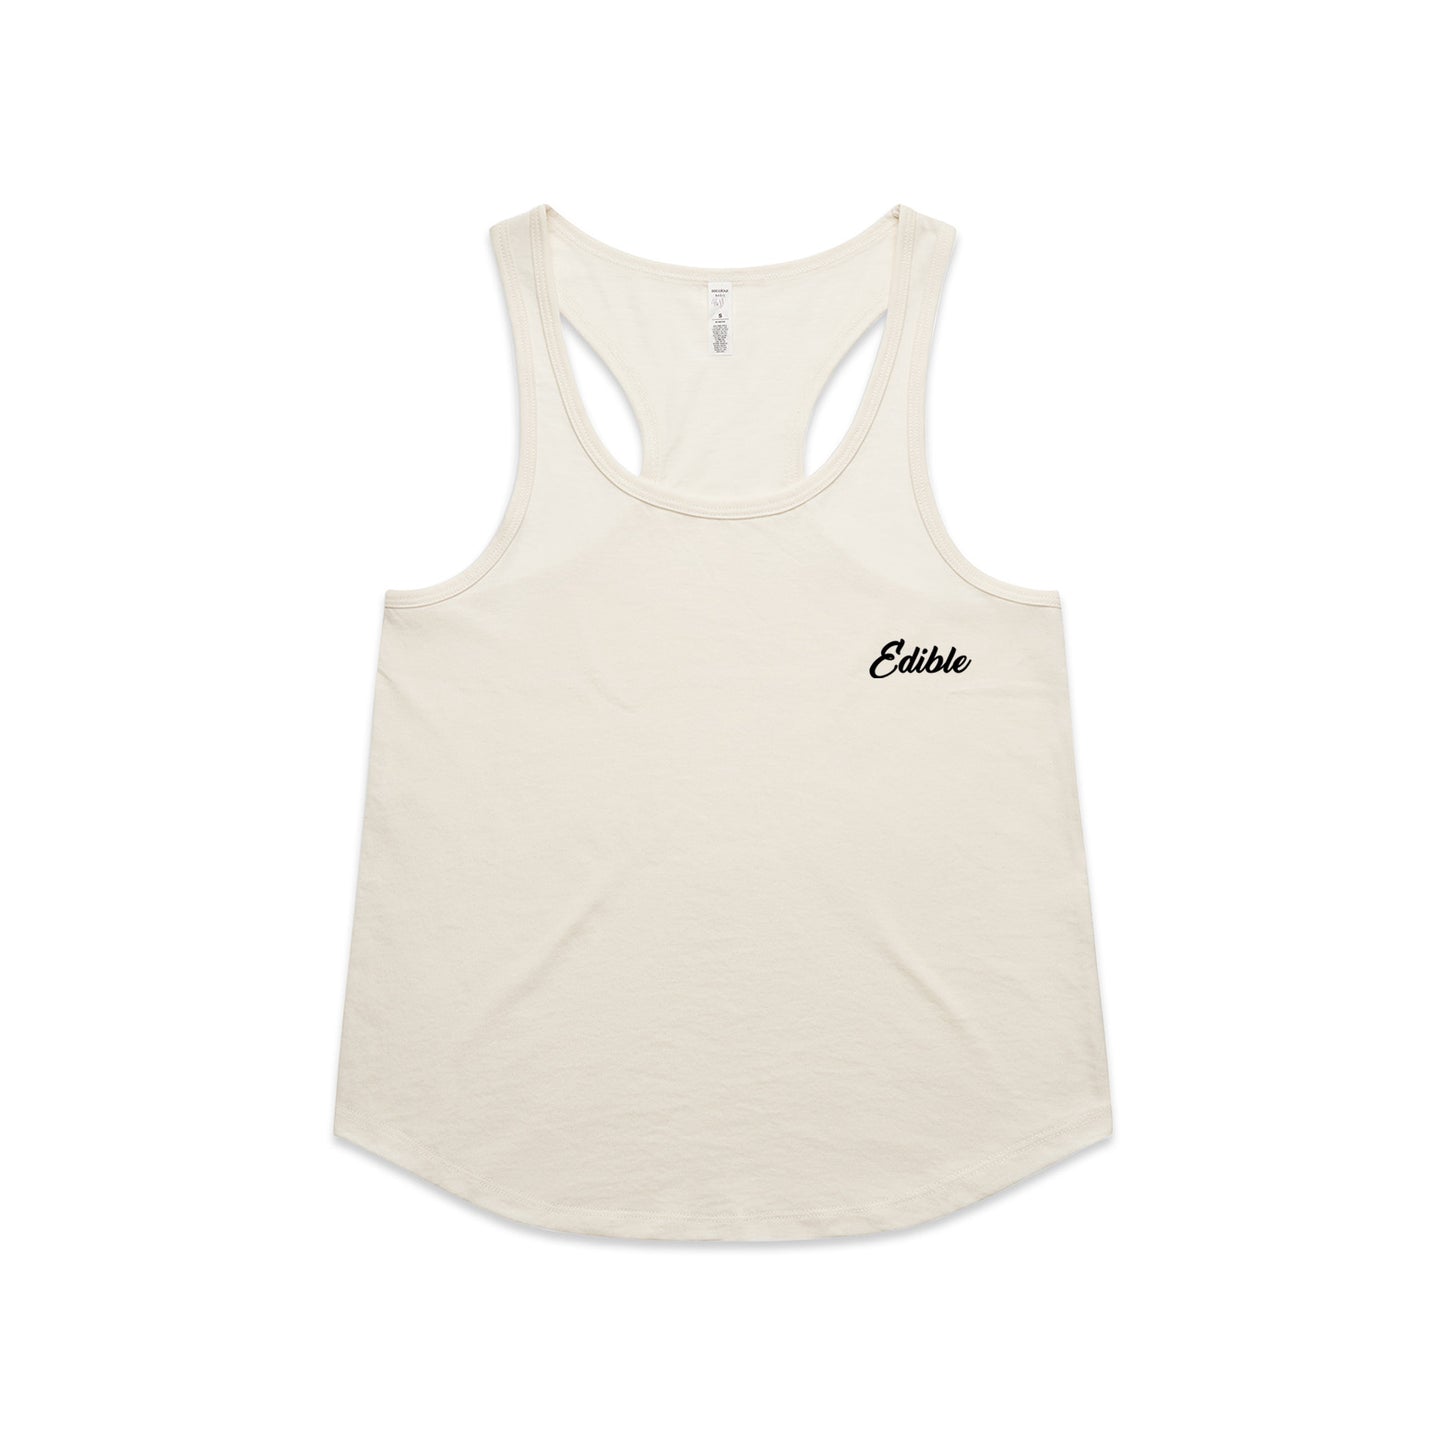 "Edible" Embroidered Women's Work Out Tank Top